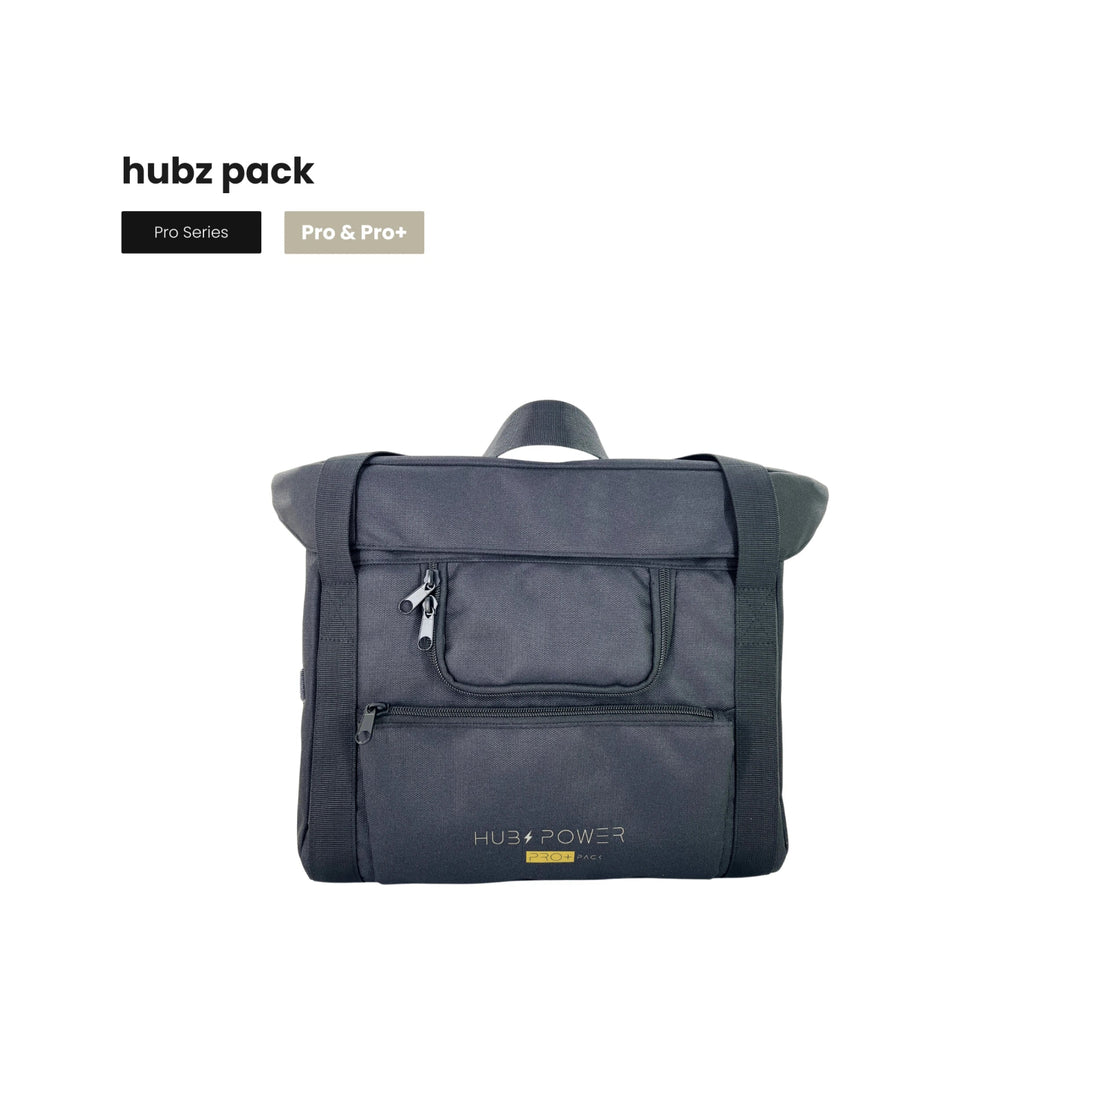 hubz pro bag for Portable Power Stations, Portable Solar Panels &amp; Home Power Stations for eco-friendly power on-demand.